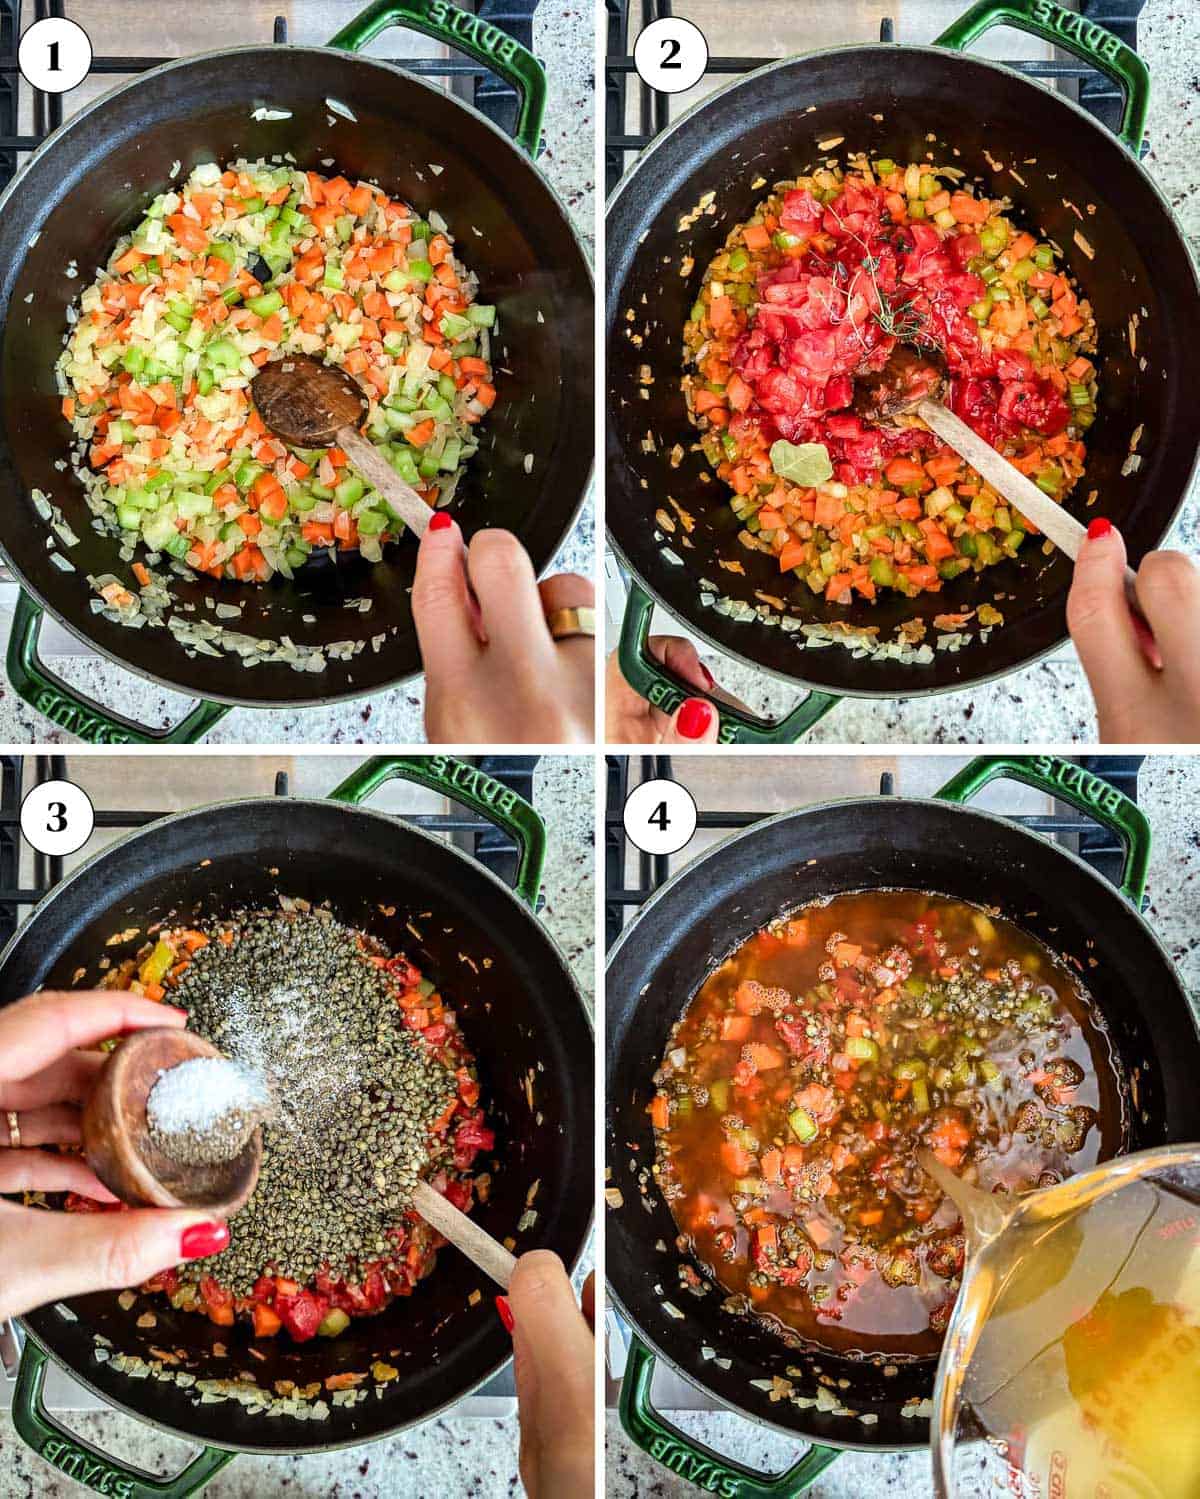 A collage of images showing how to make French green lentil soup recipe.